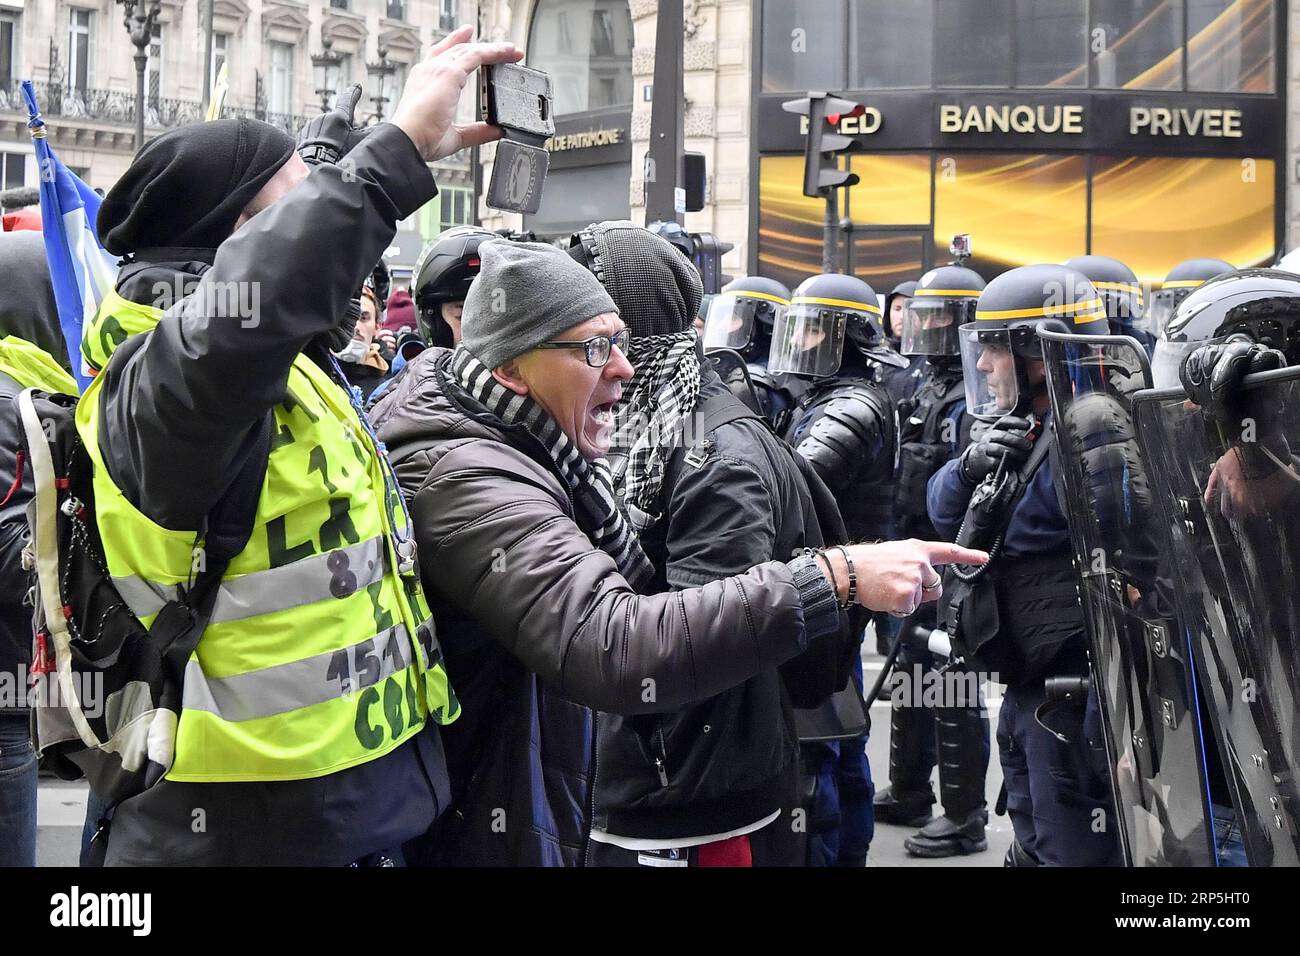 (181215) -- PARIS, Dec. 15, 2018 -- Protesters confront French gendarmes at the Opera Square in Paris, France, on Dec. 15, 2018. French government planned tough security measures by mobilizing thousands of officers and using armored vehicles to handle more threats of violence as Yellow Vests are set to stage a fresh round of nationwide protests on Saturday, despite President Emmanuel Macron s measures seeking to quell public anger over poor revenue and soaring living costs. ) FRANCE-PARIS- YELLOW VESTS -PROTEST ChenxYichen PUBLICATIONxNOTxINxCHN Stock Photo